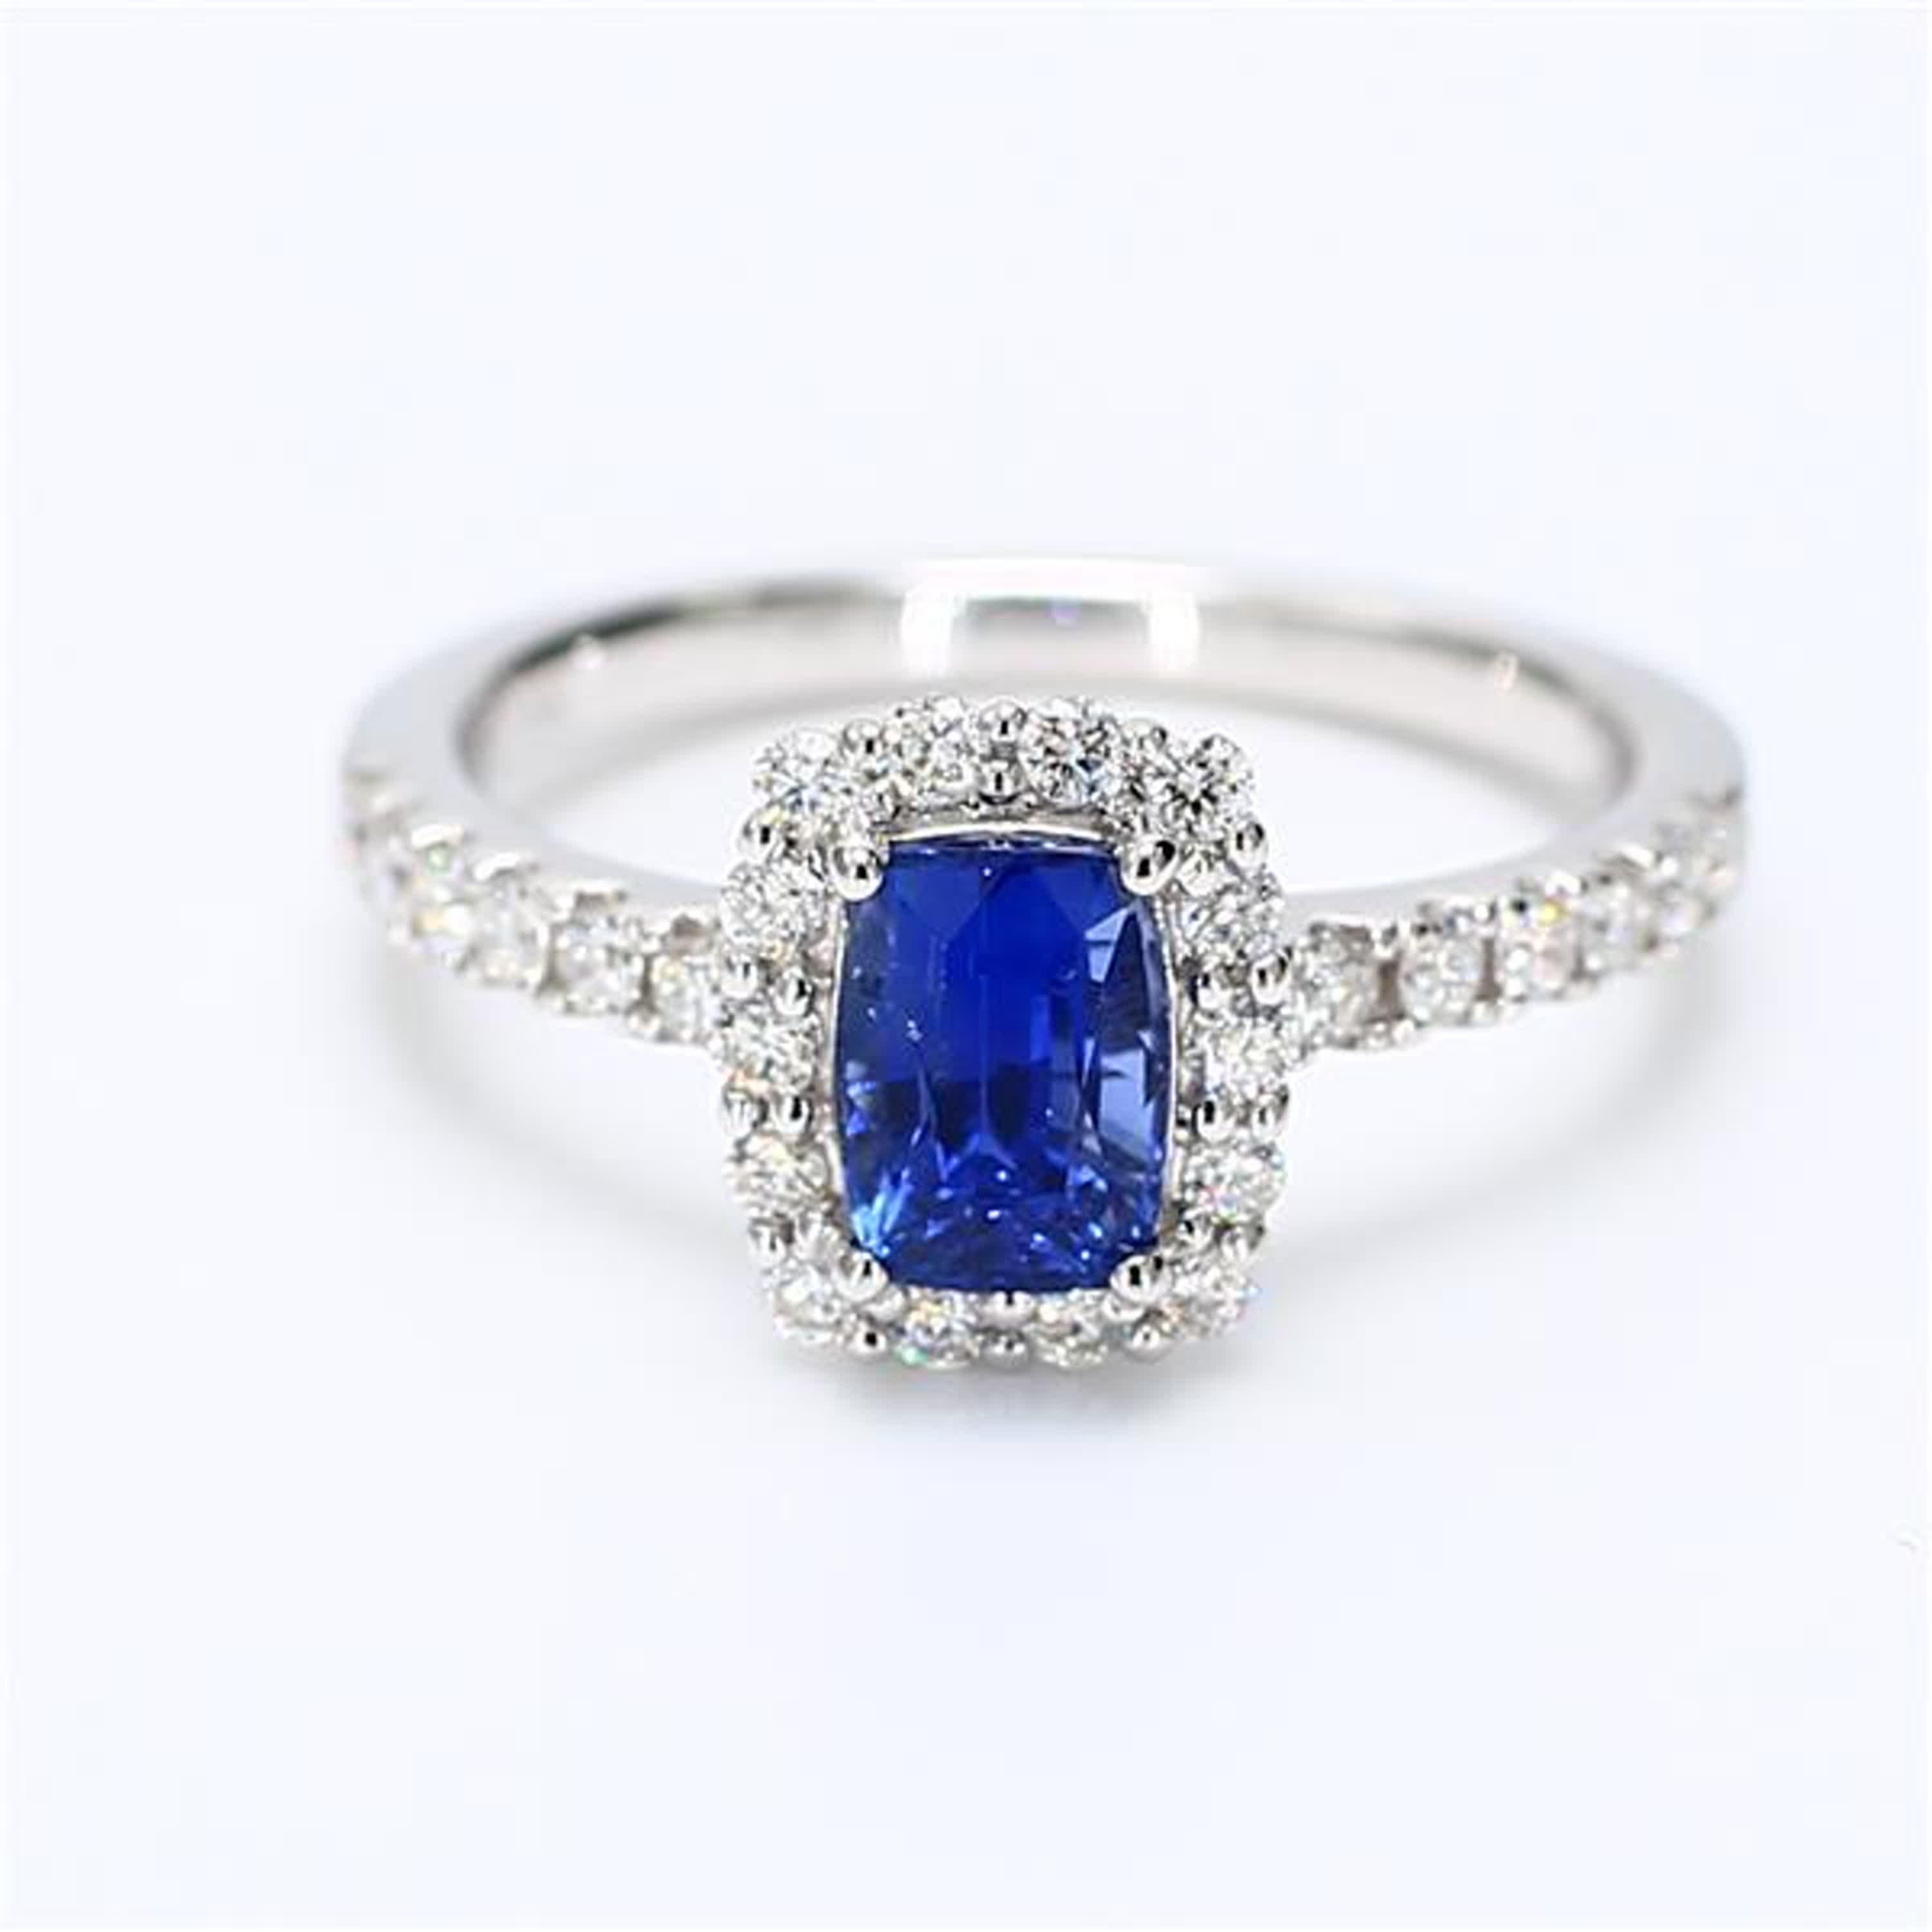 RareGemWorld's classic sapphire ring. Mounted in a beautiful 18K White Gold setting with a natural cushion cut blue sapphire. The sapphire is surrounded by natural round white diamond melee. This ring is guaranteed to impress and enhance your